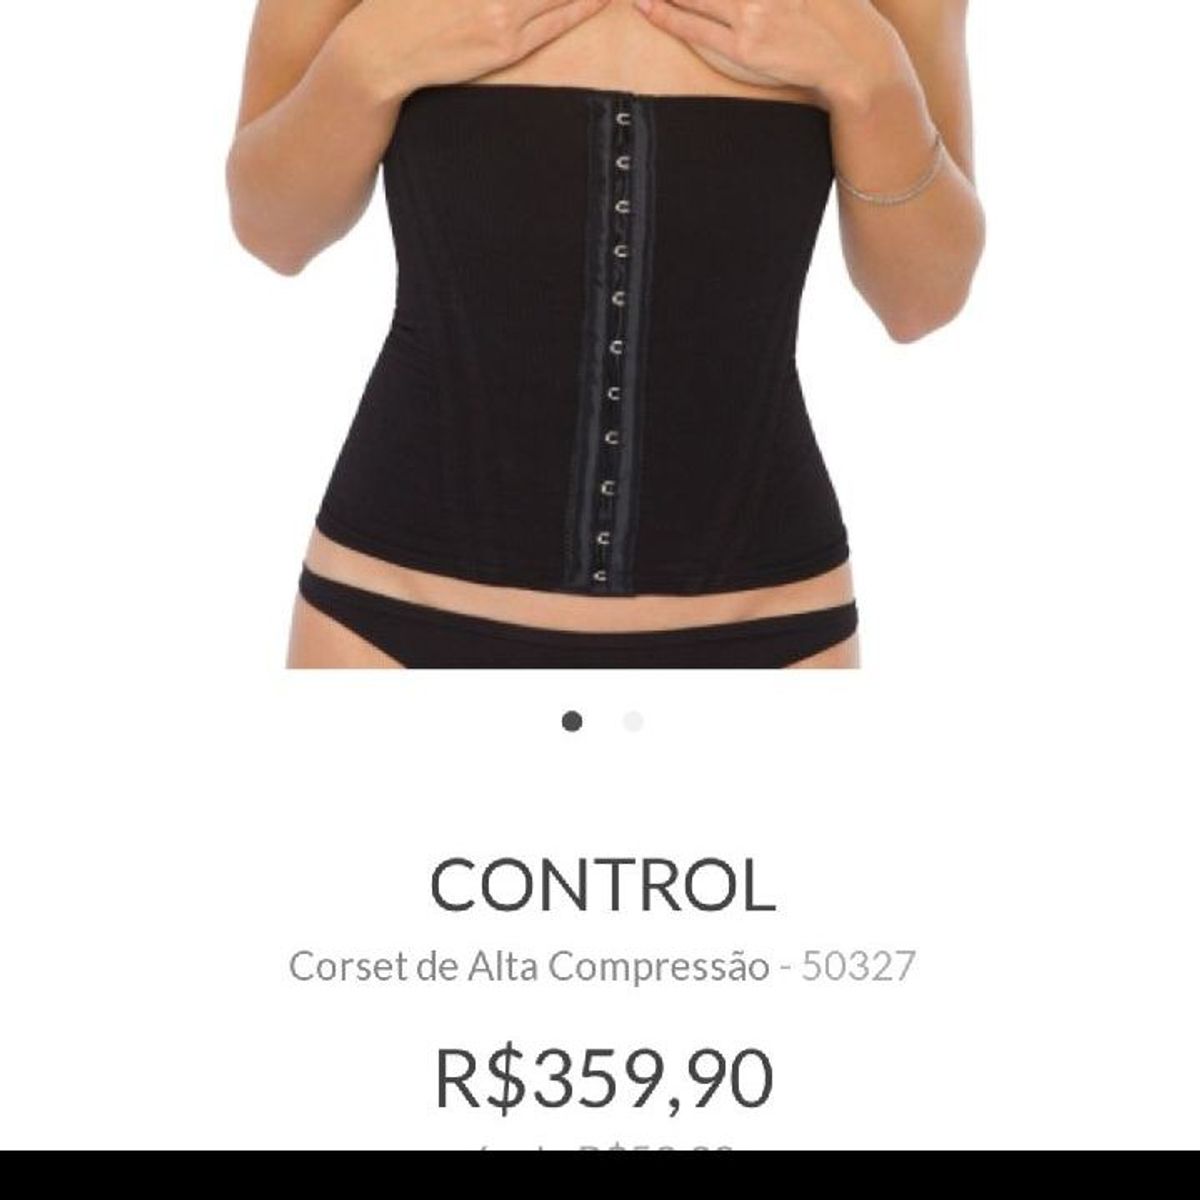 Aesthetic high compression corset